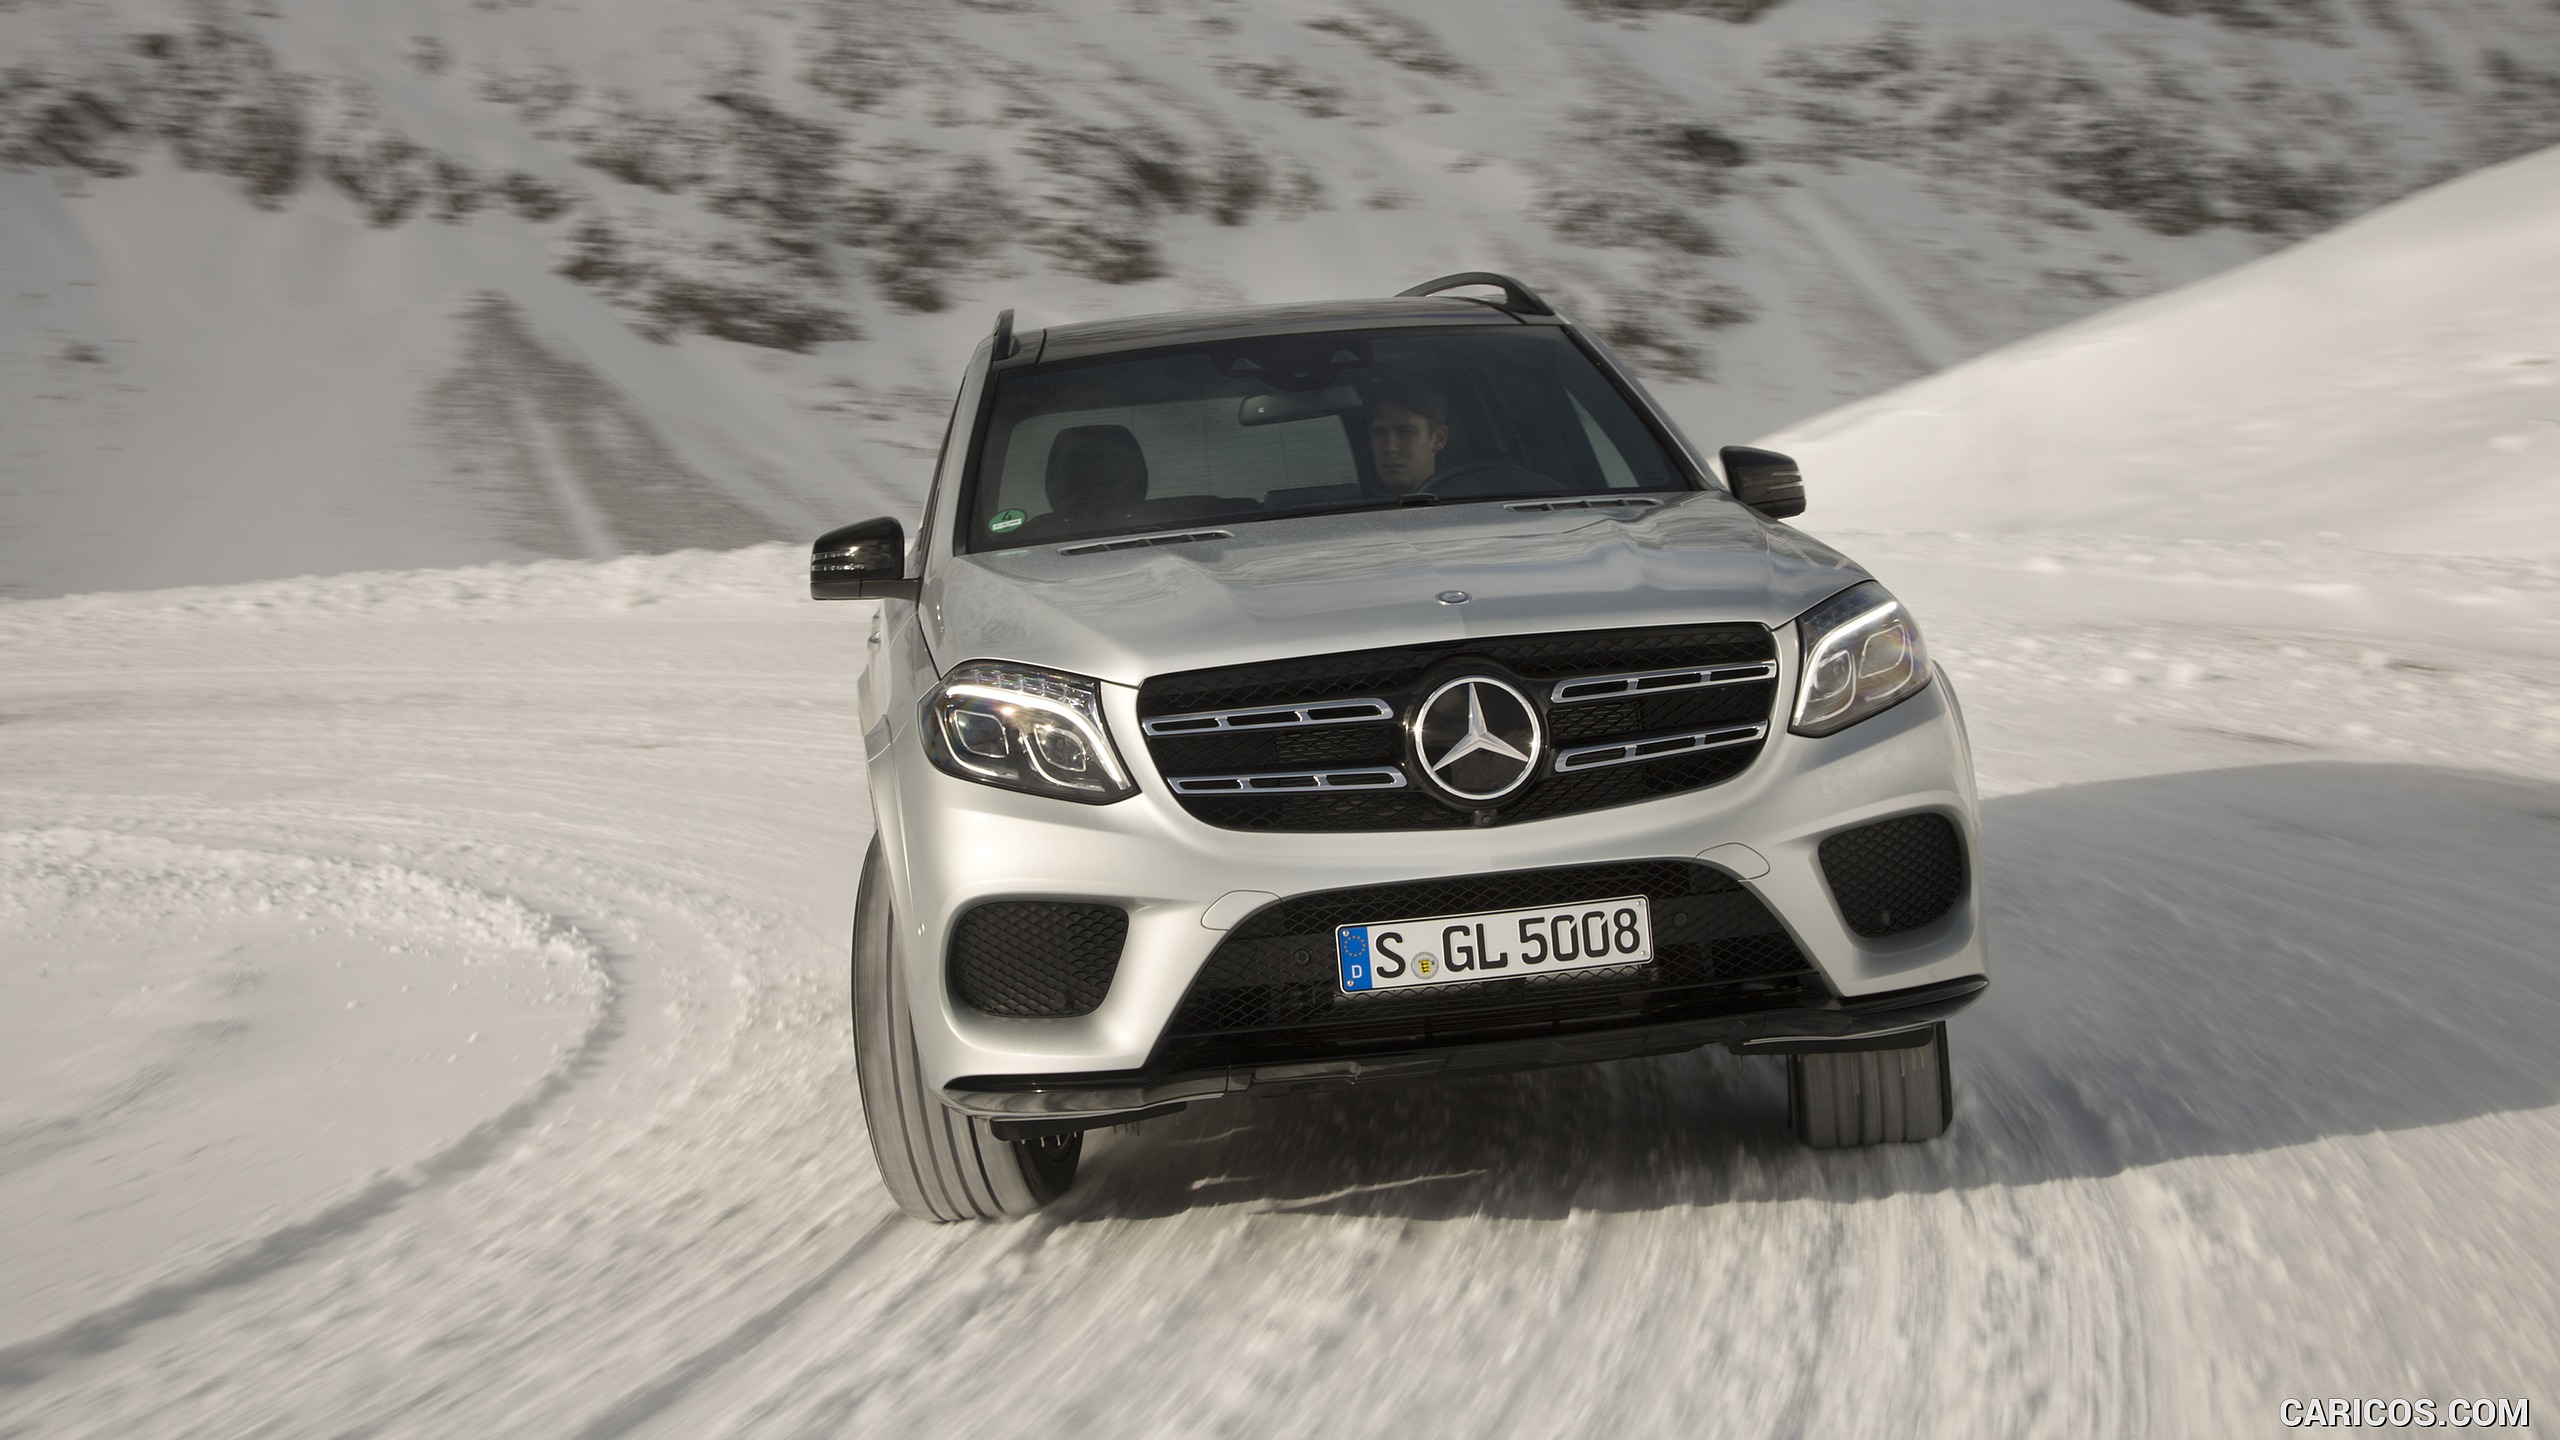 2017 Mercedes-Benz GLS 500 4MATIC AMG Line in Snow - Front, #127 of 255